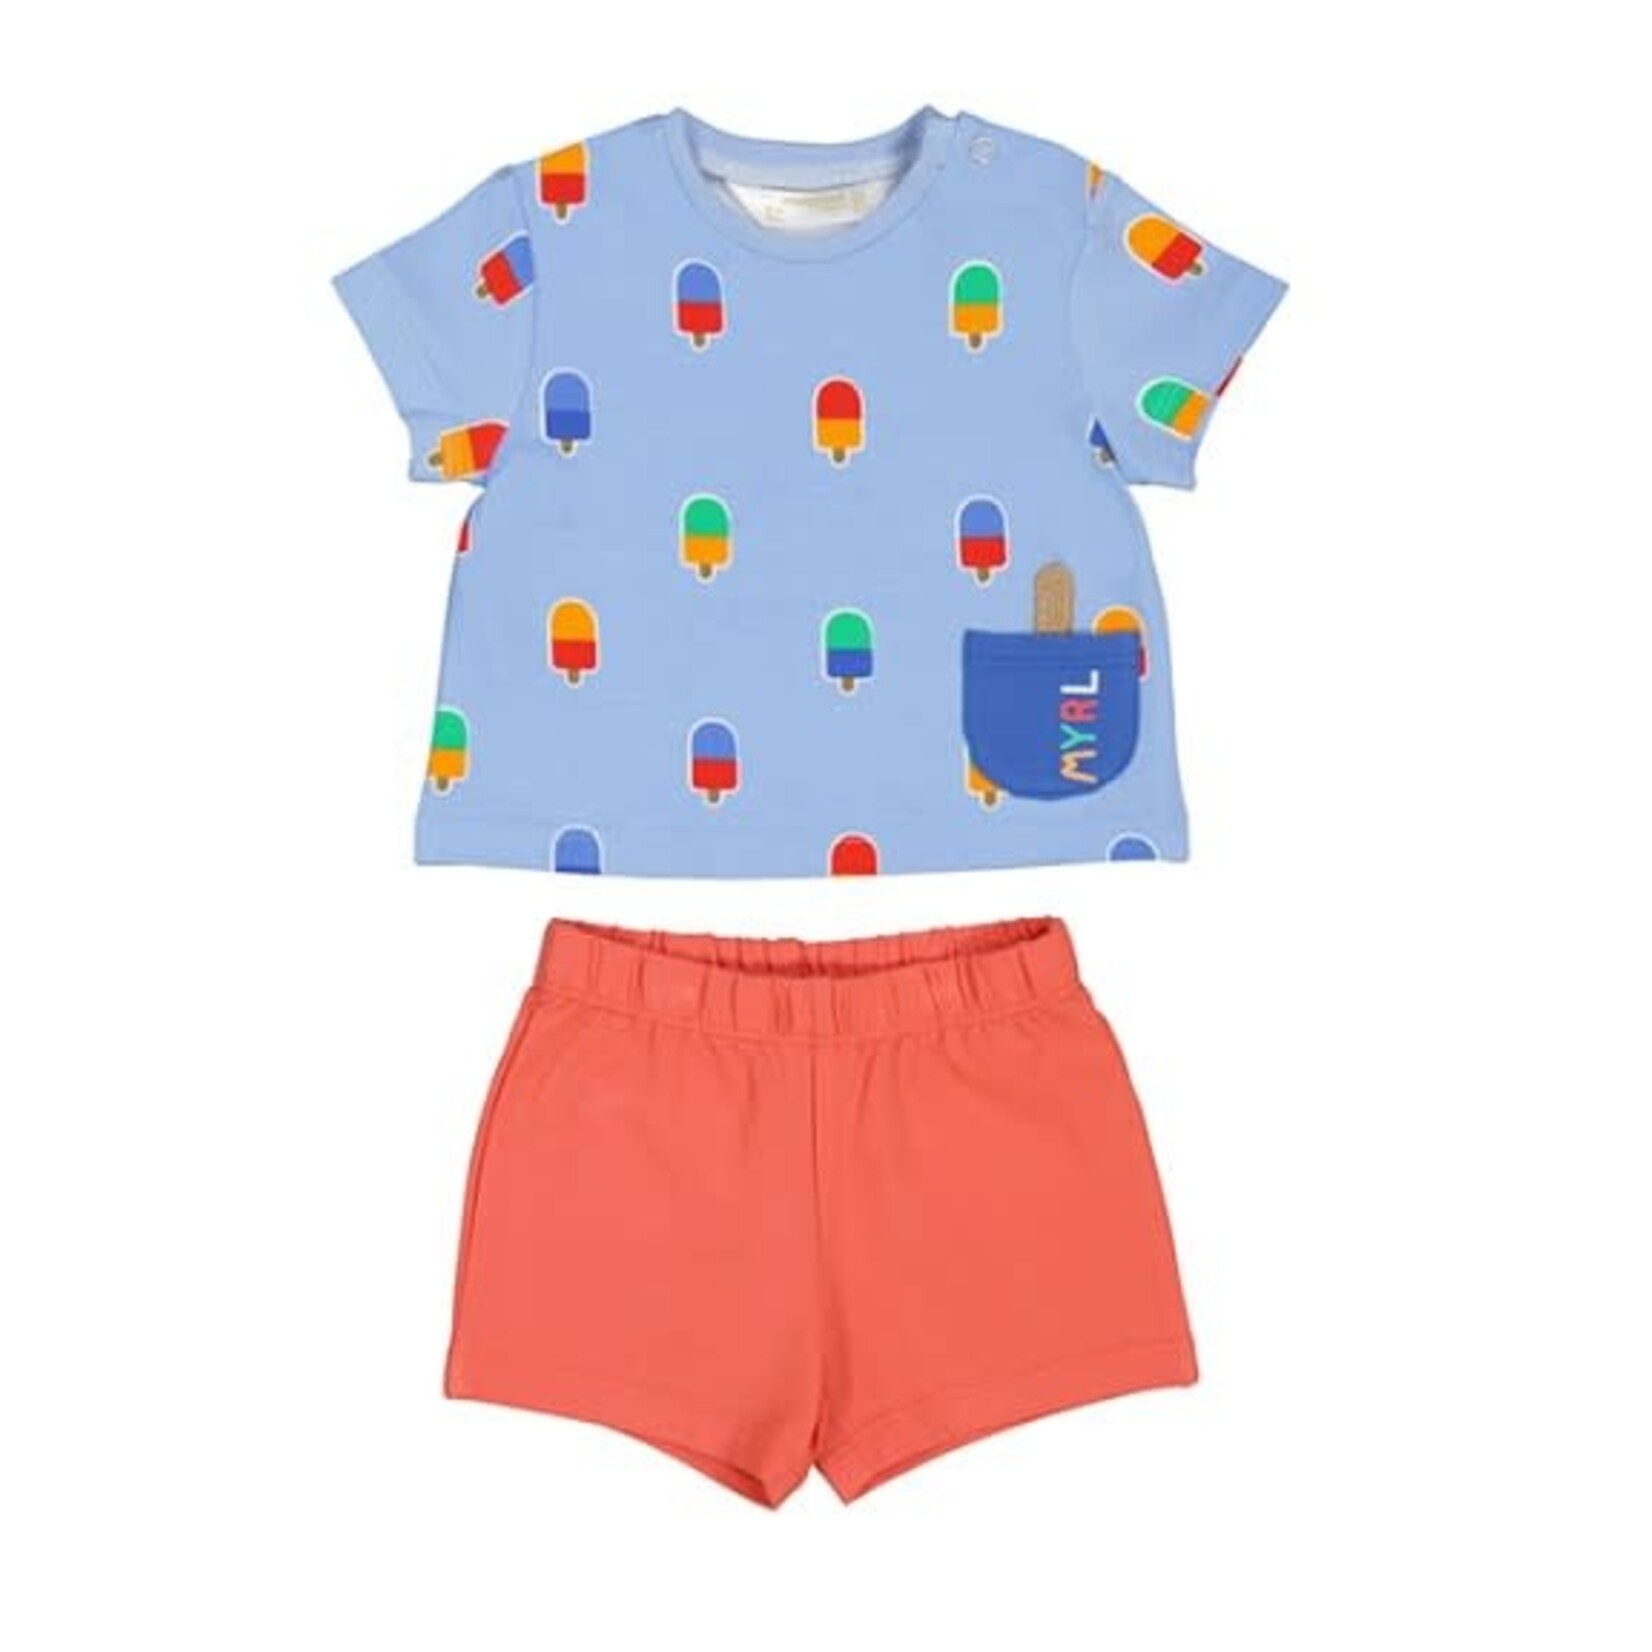 Mayoral MAYORAL - Two-piece set - Shortsleeve light blue t-shirt with popsicle print and red shorts